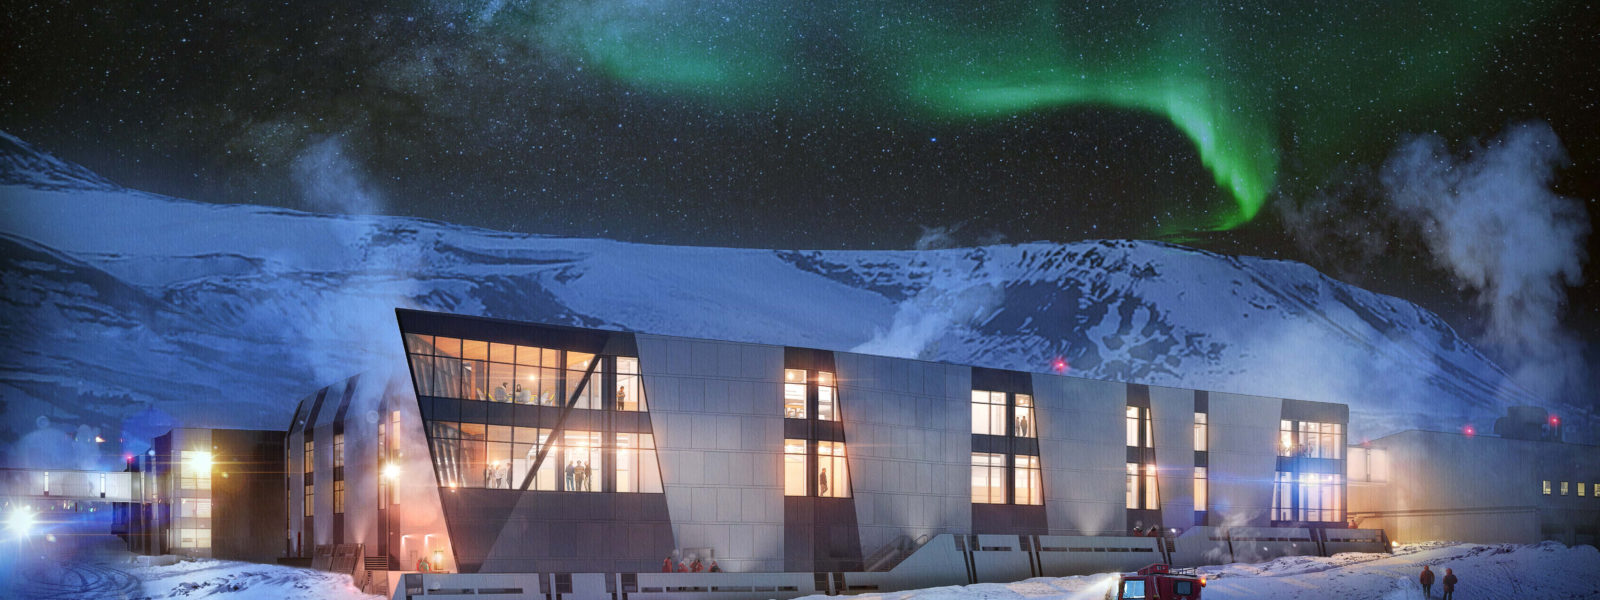 15 Works of Oz Architecture Every Architect should visit - McMurdo Station